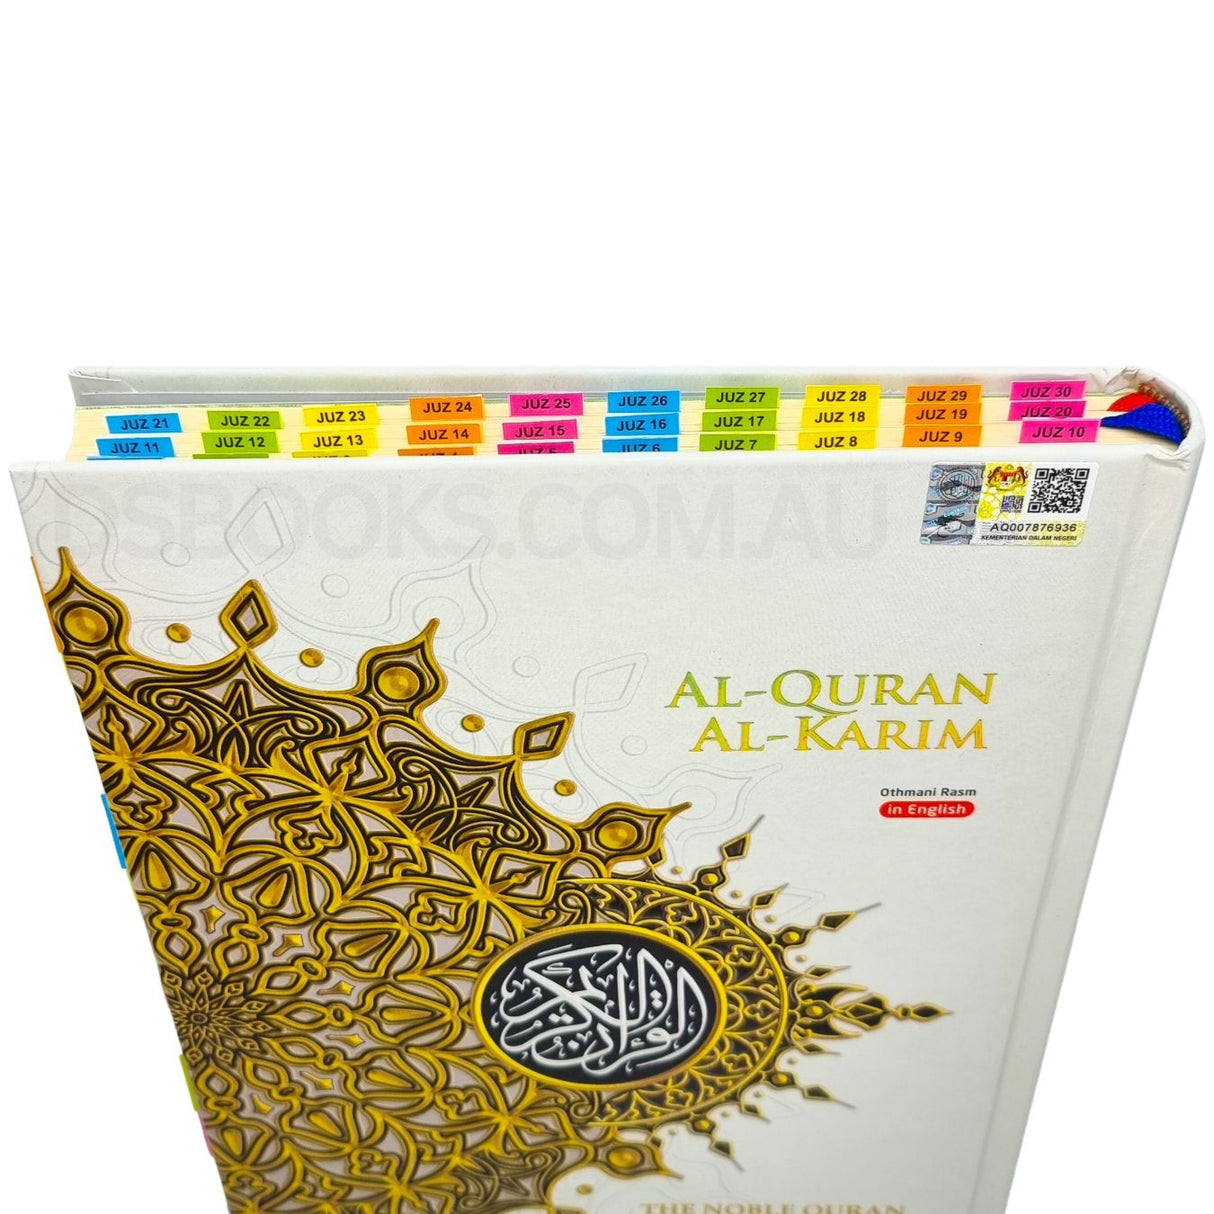 Maqdis with subjects tags - Word for Word Quran - Small